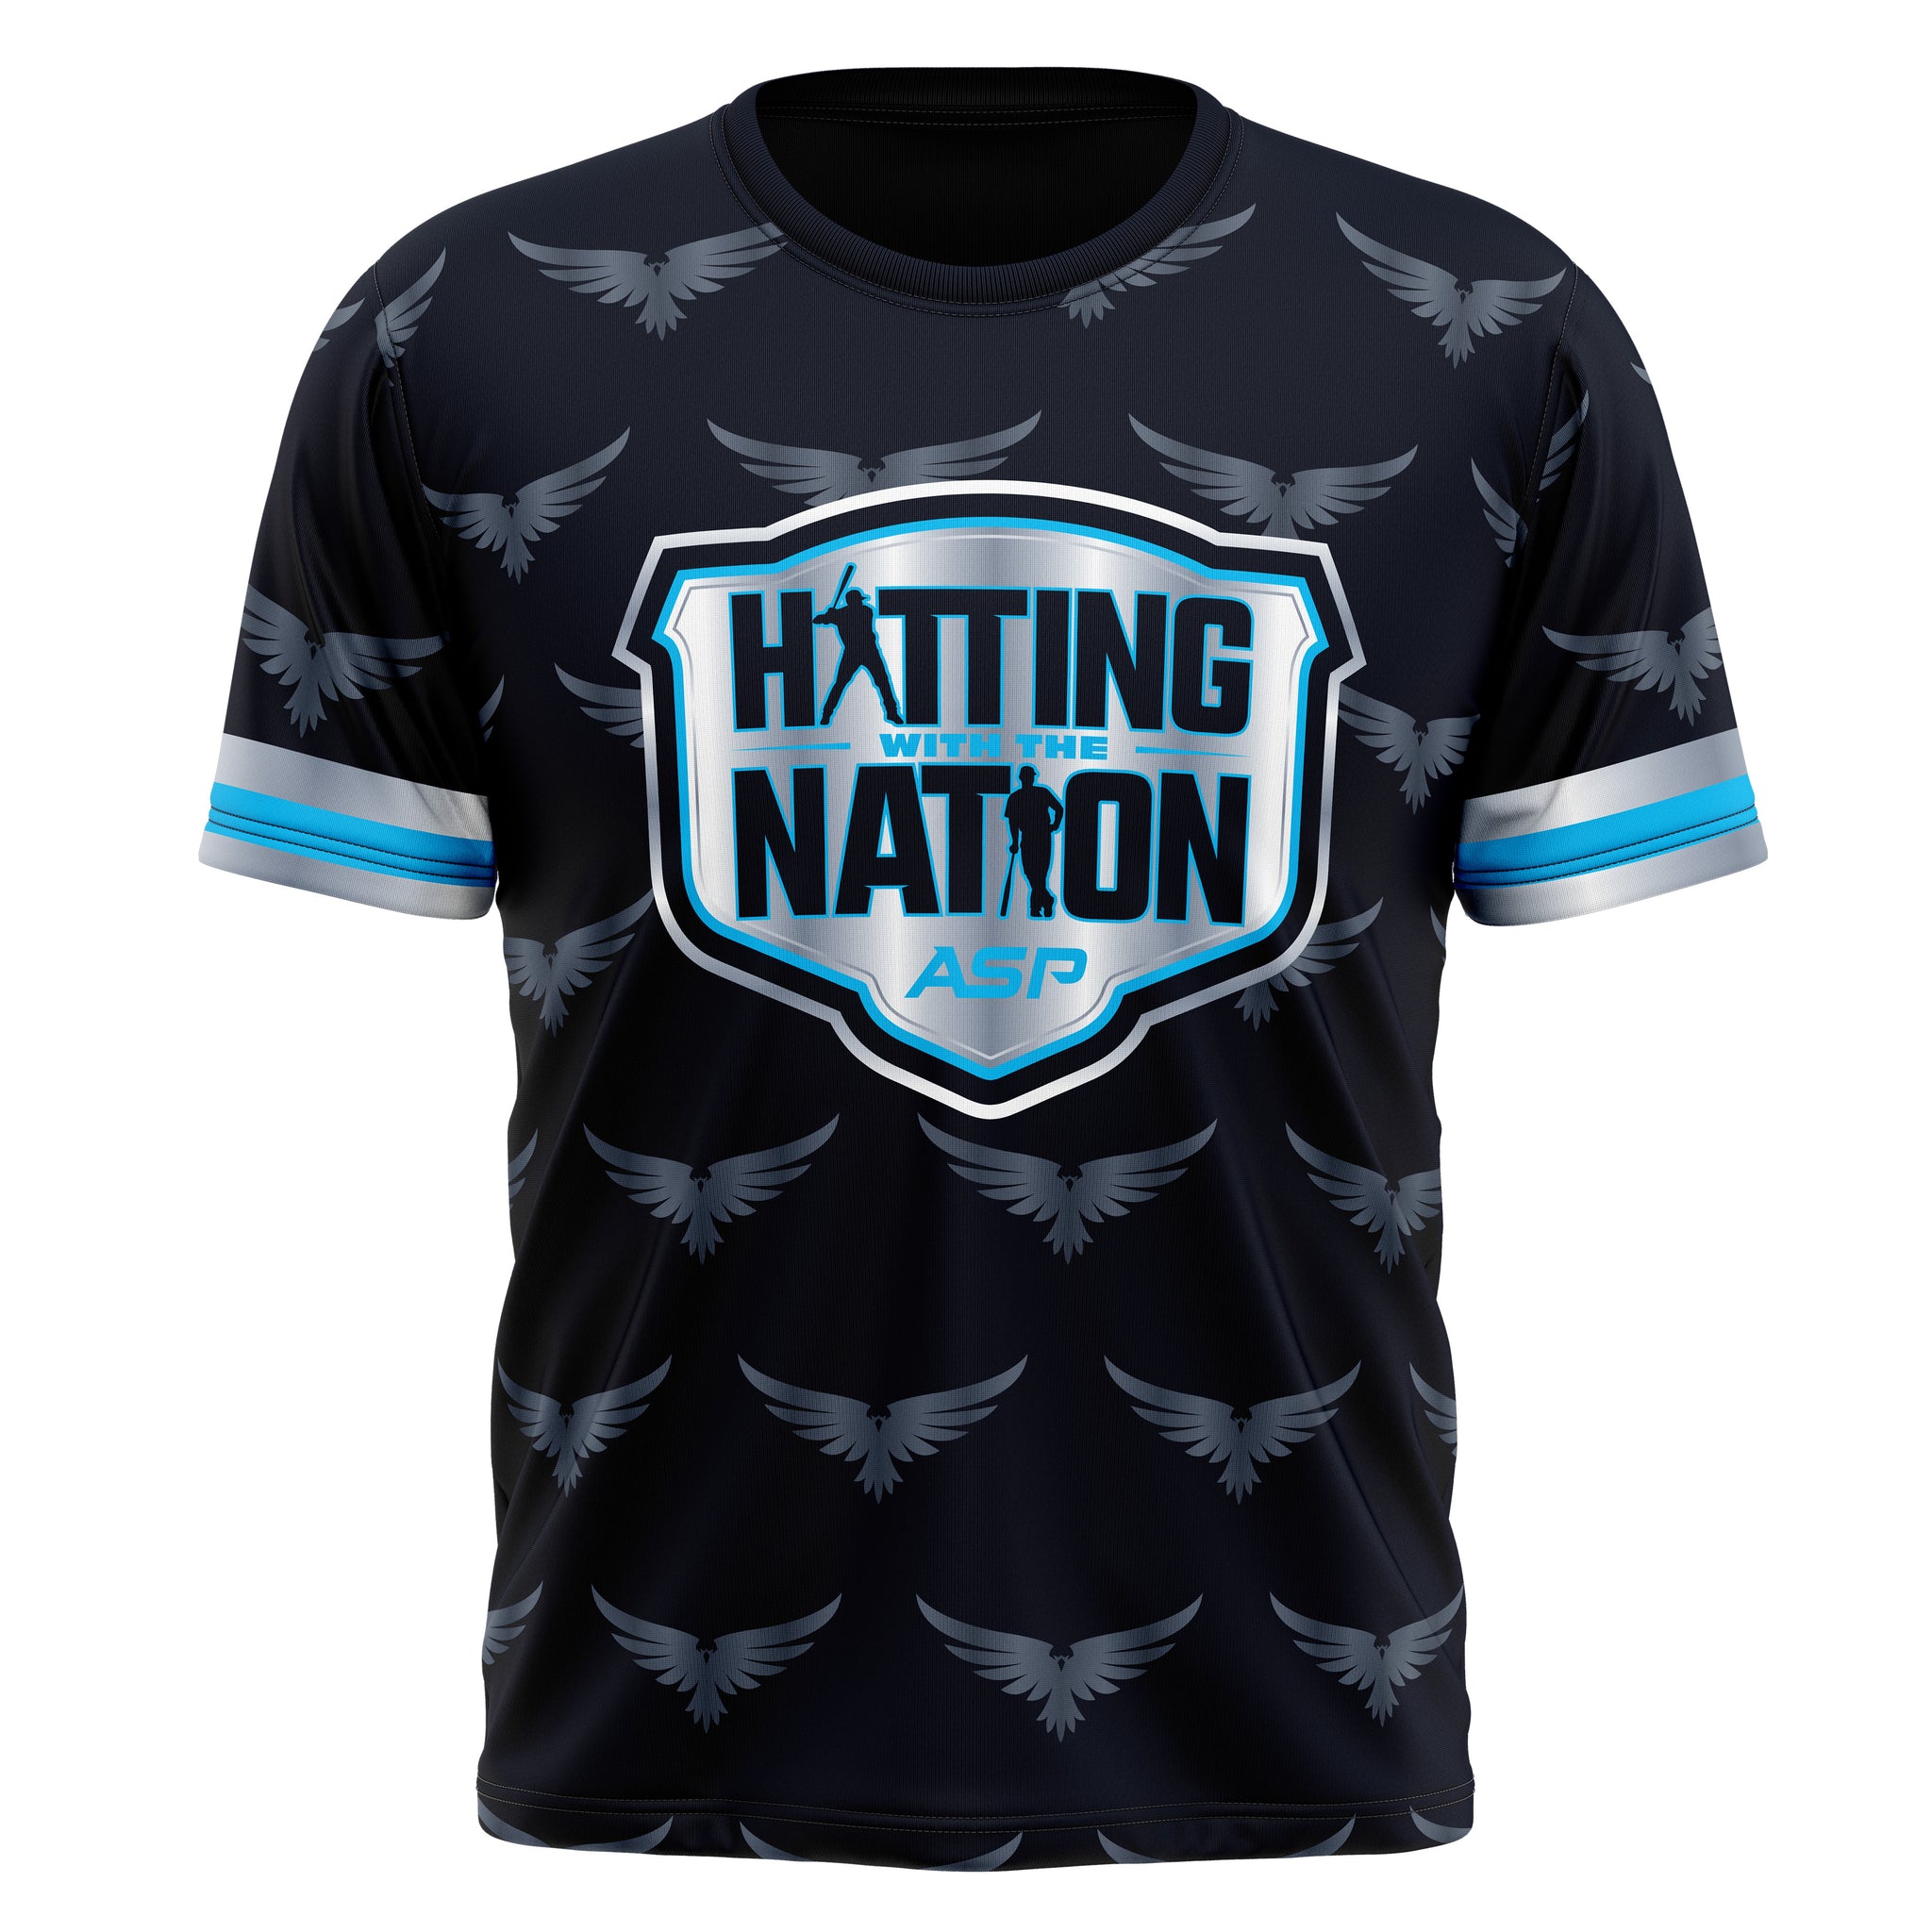 ASP Hitting with the Nation Short Sleeve